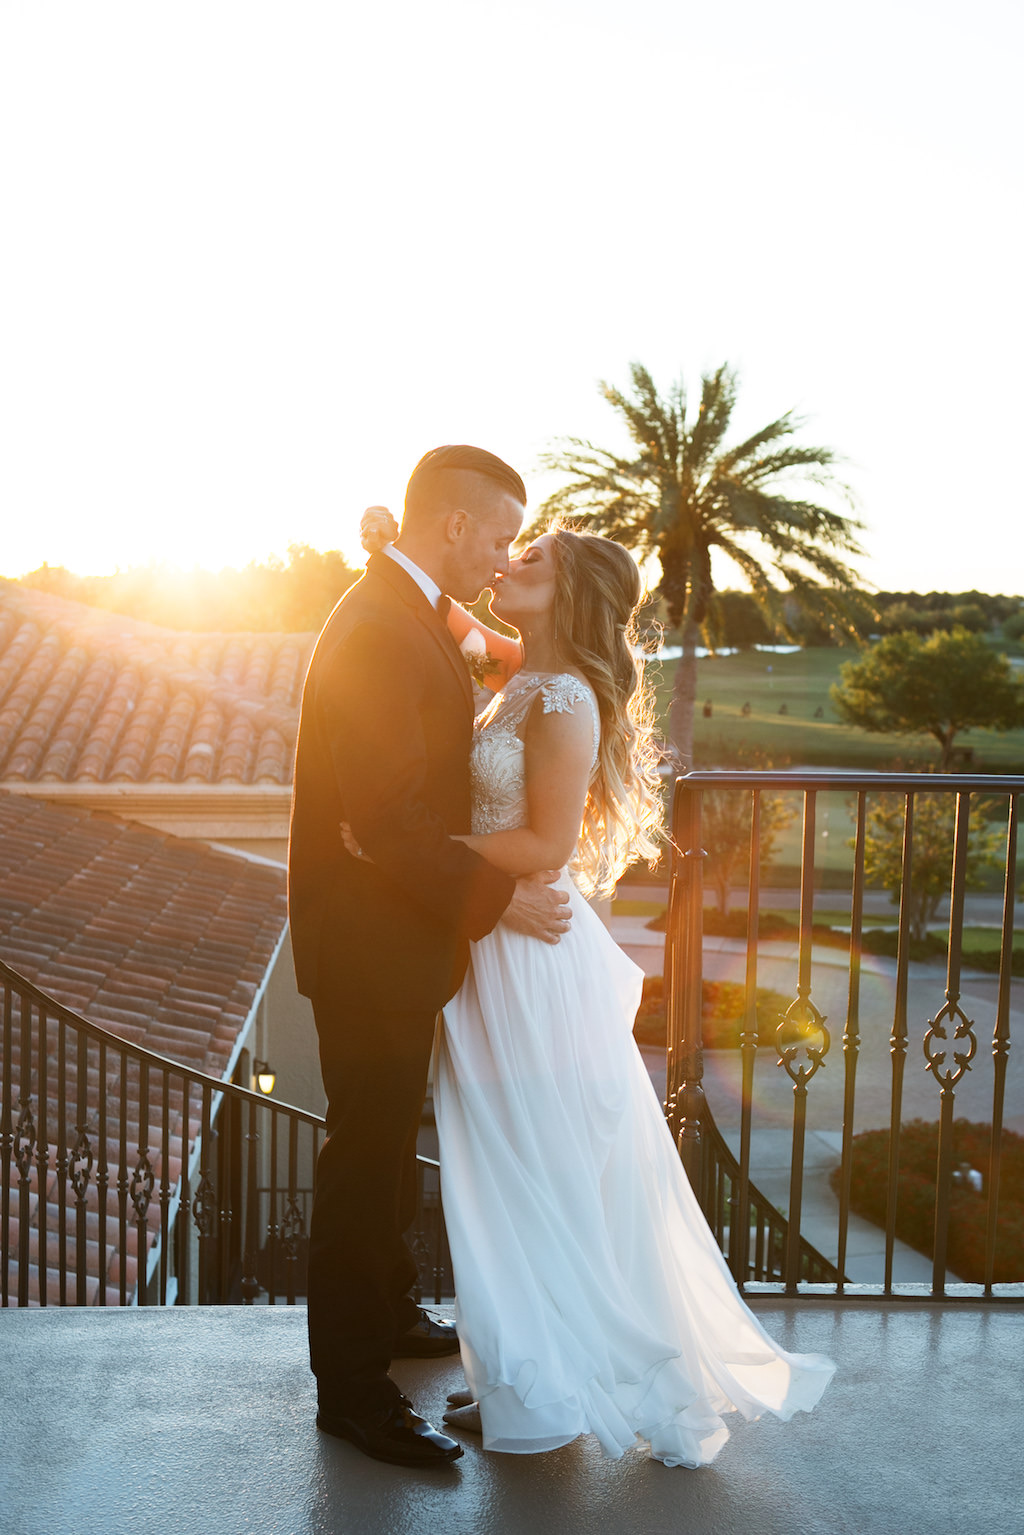 Romantic Outdoor Sunset Bride and Groom Wedding Portrait, Bride in Maggie Sottero Illusion Tank Top with Beaded Lace Motif Wedding Dress with White Rose Bouquet, Groom in Black Tuxedo | Sarasota Wedding Photographer Carrie Wildes Photography | Sarasota Wedding Venue Lakewood Ranch Golf and Country Club